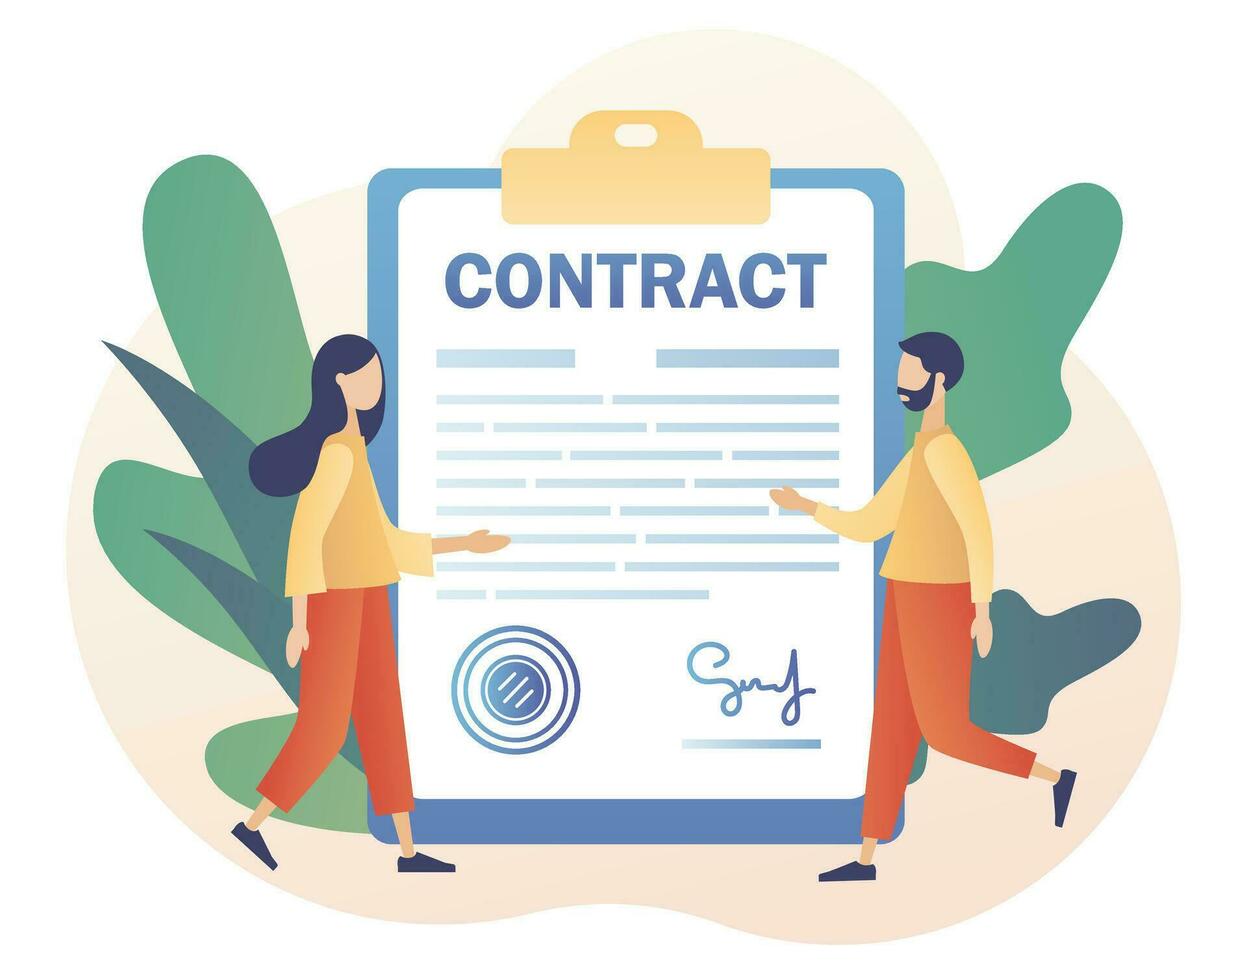 Contract concept. Tiny man and wonan signing agreement, legal document or contract online. Digital signature. Modern flat cartoon style. Vector illustration on white background